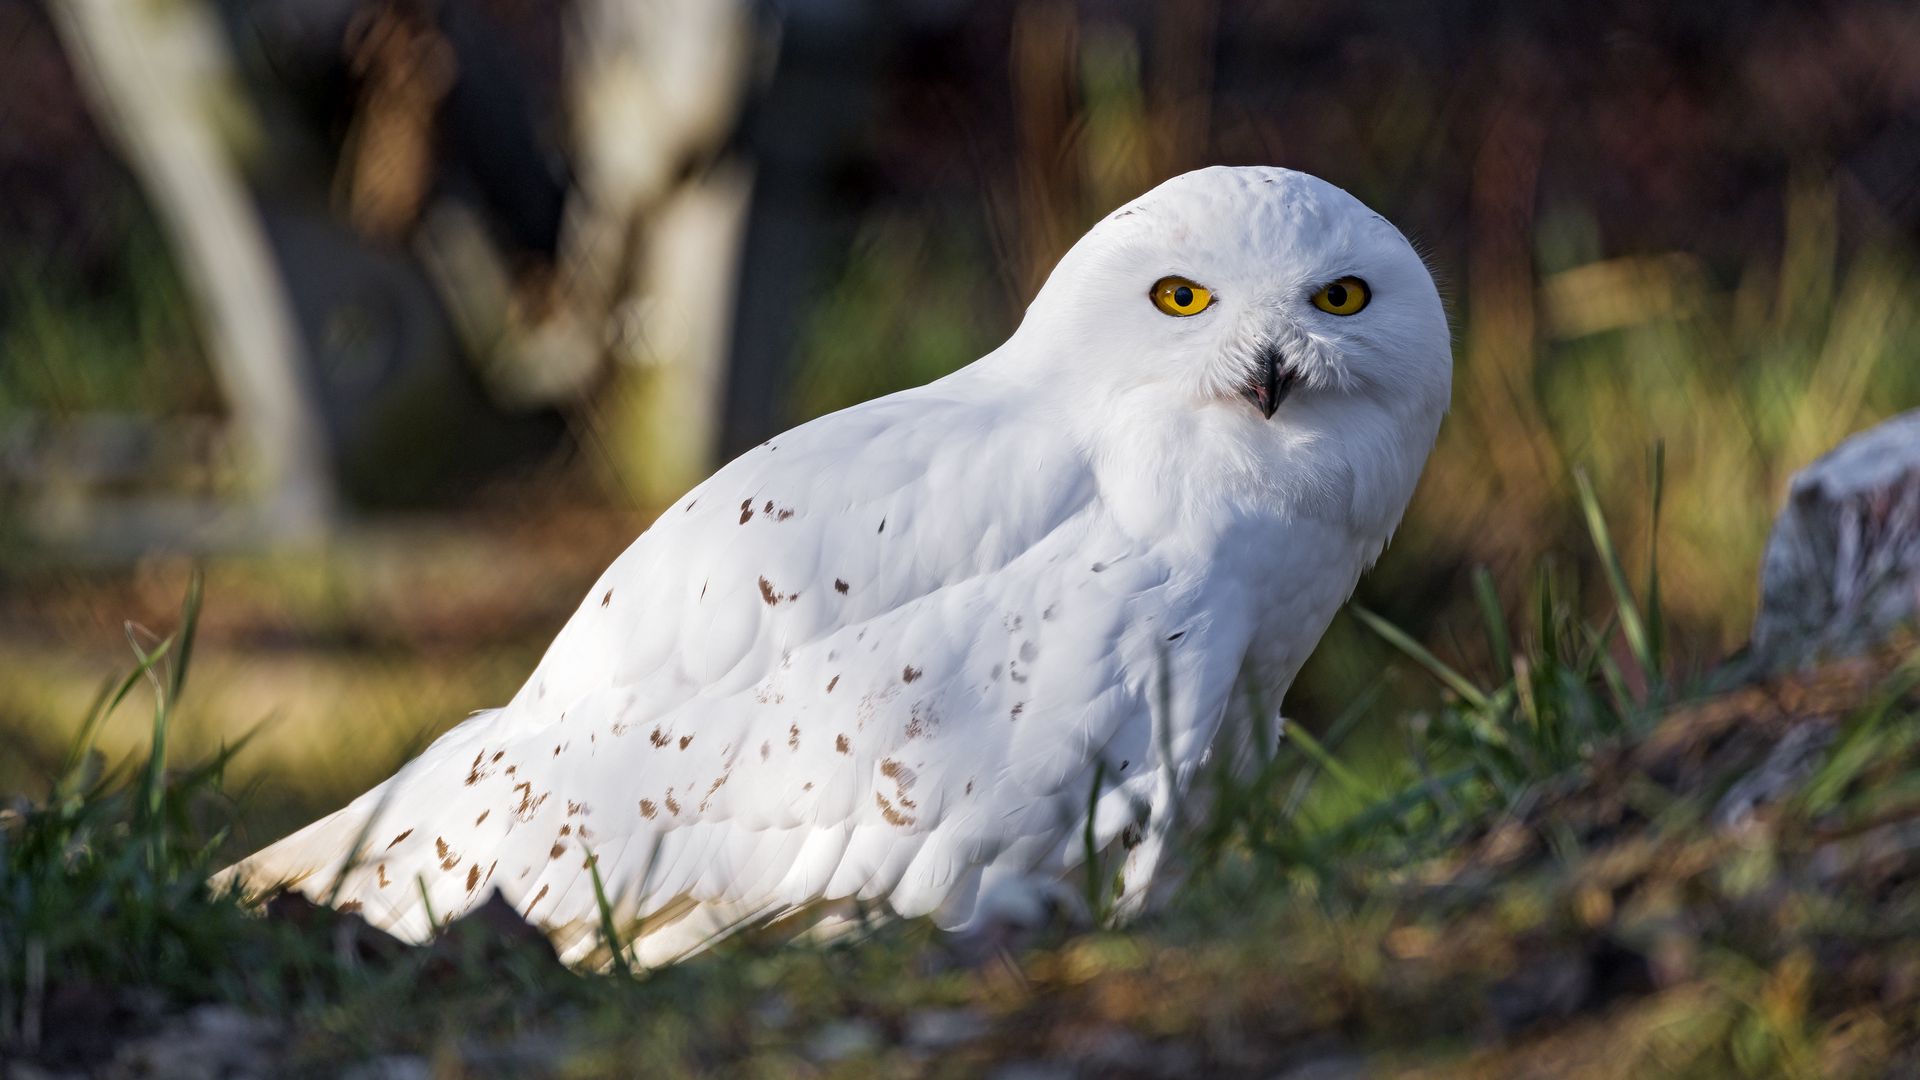 Download wallpaper 1920x1080 white owl, owl, bird, feathers full hd ...